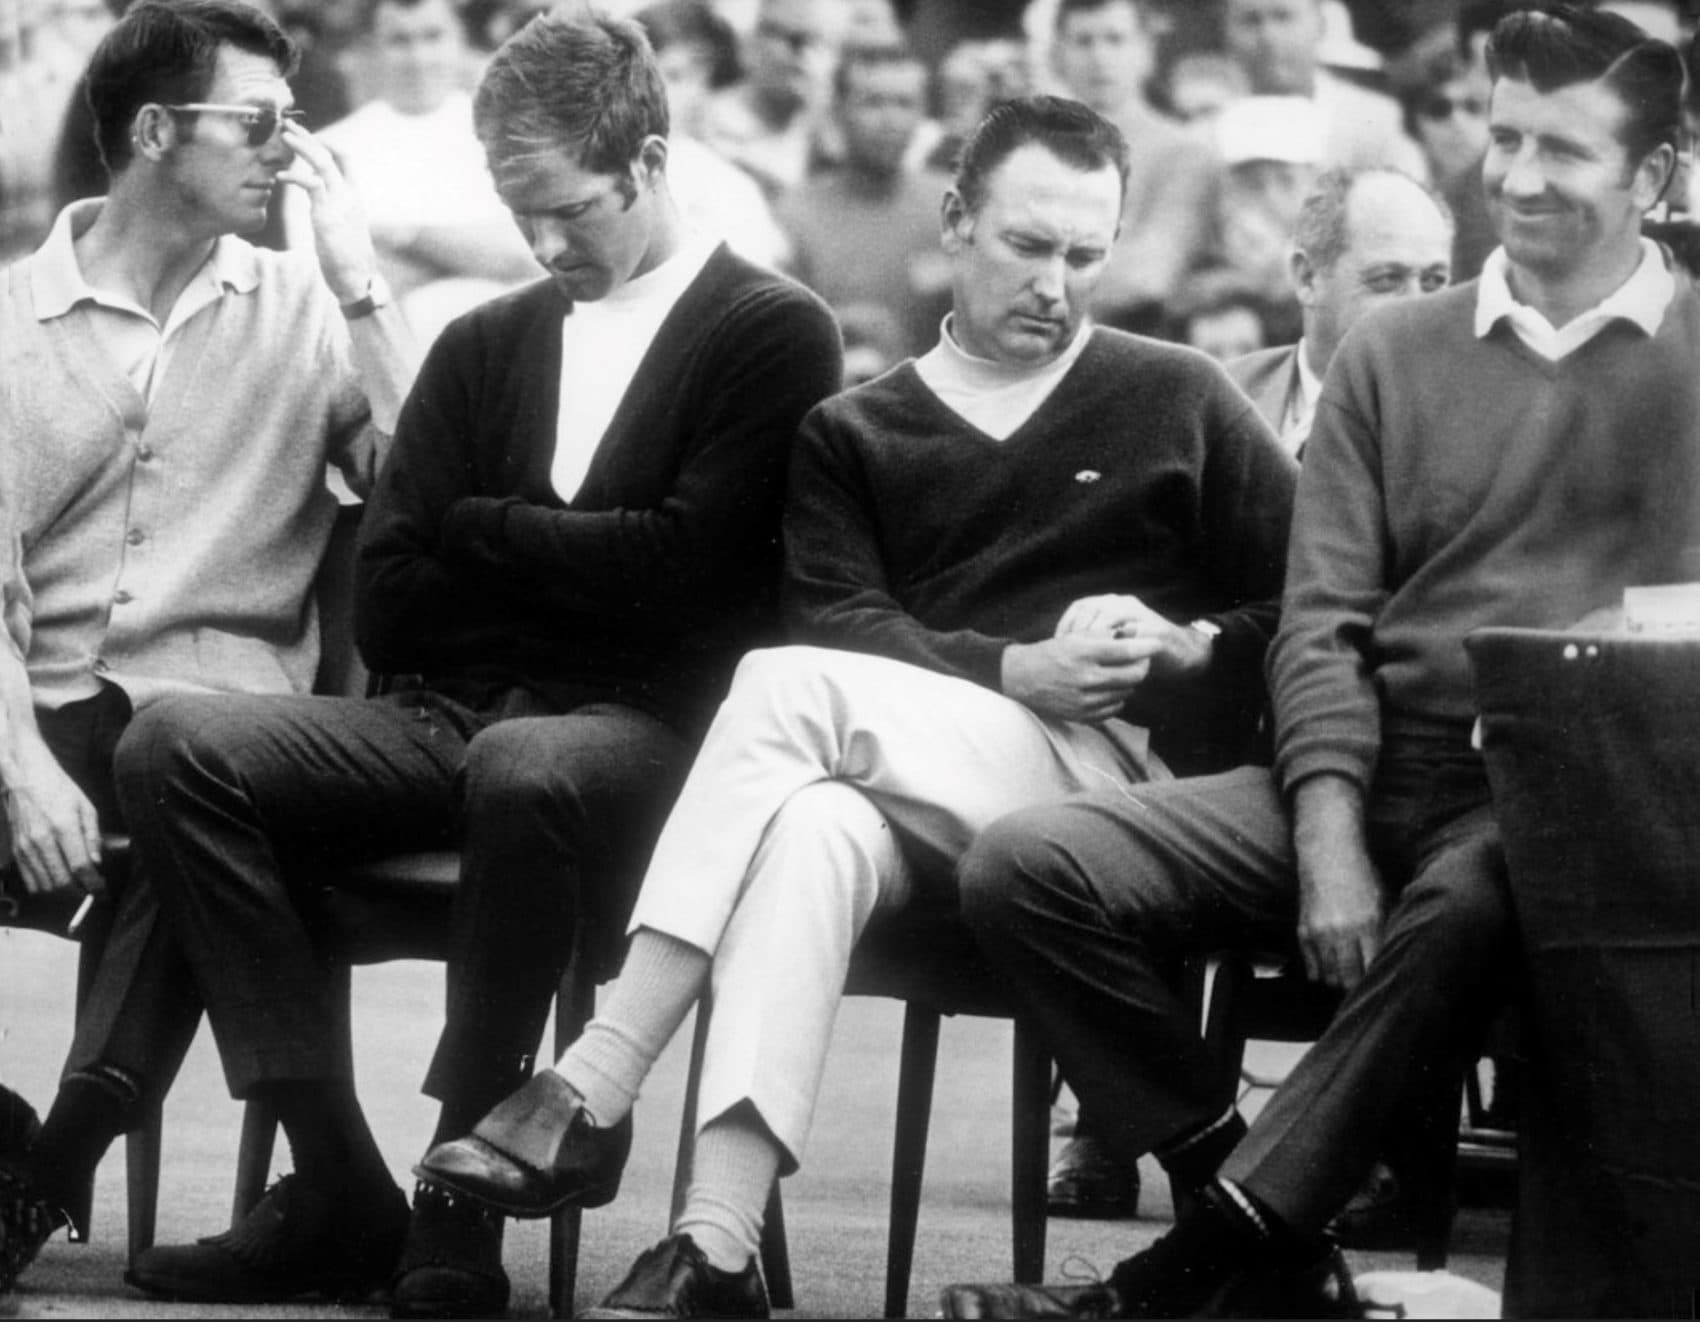 George Archer (far right) beams after he beat 3 other tough golfers at the 1969 Masters. (Courtesy Donna Archer) 